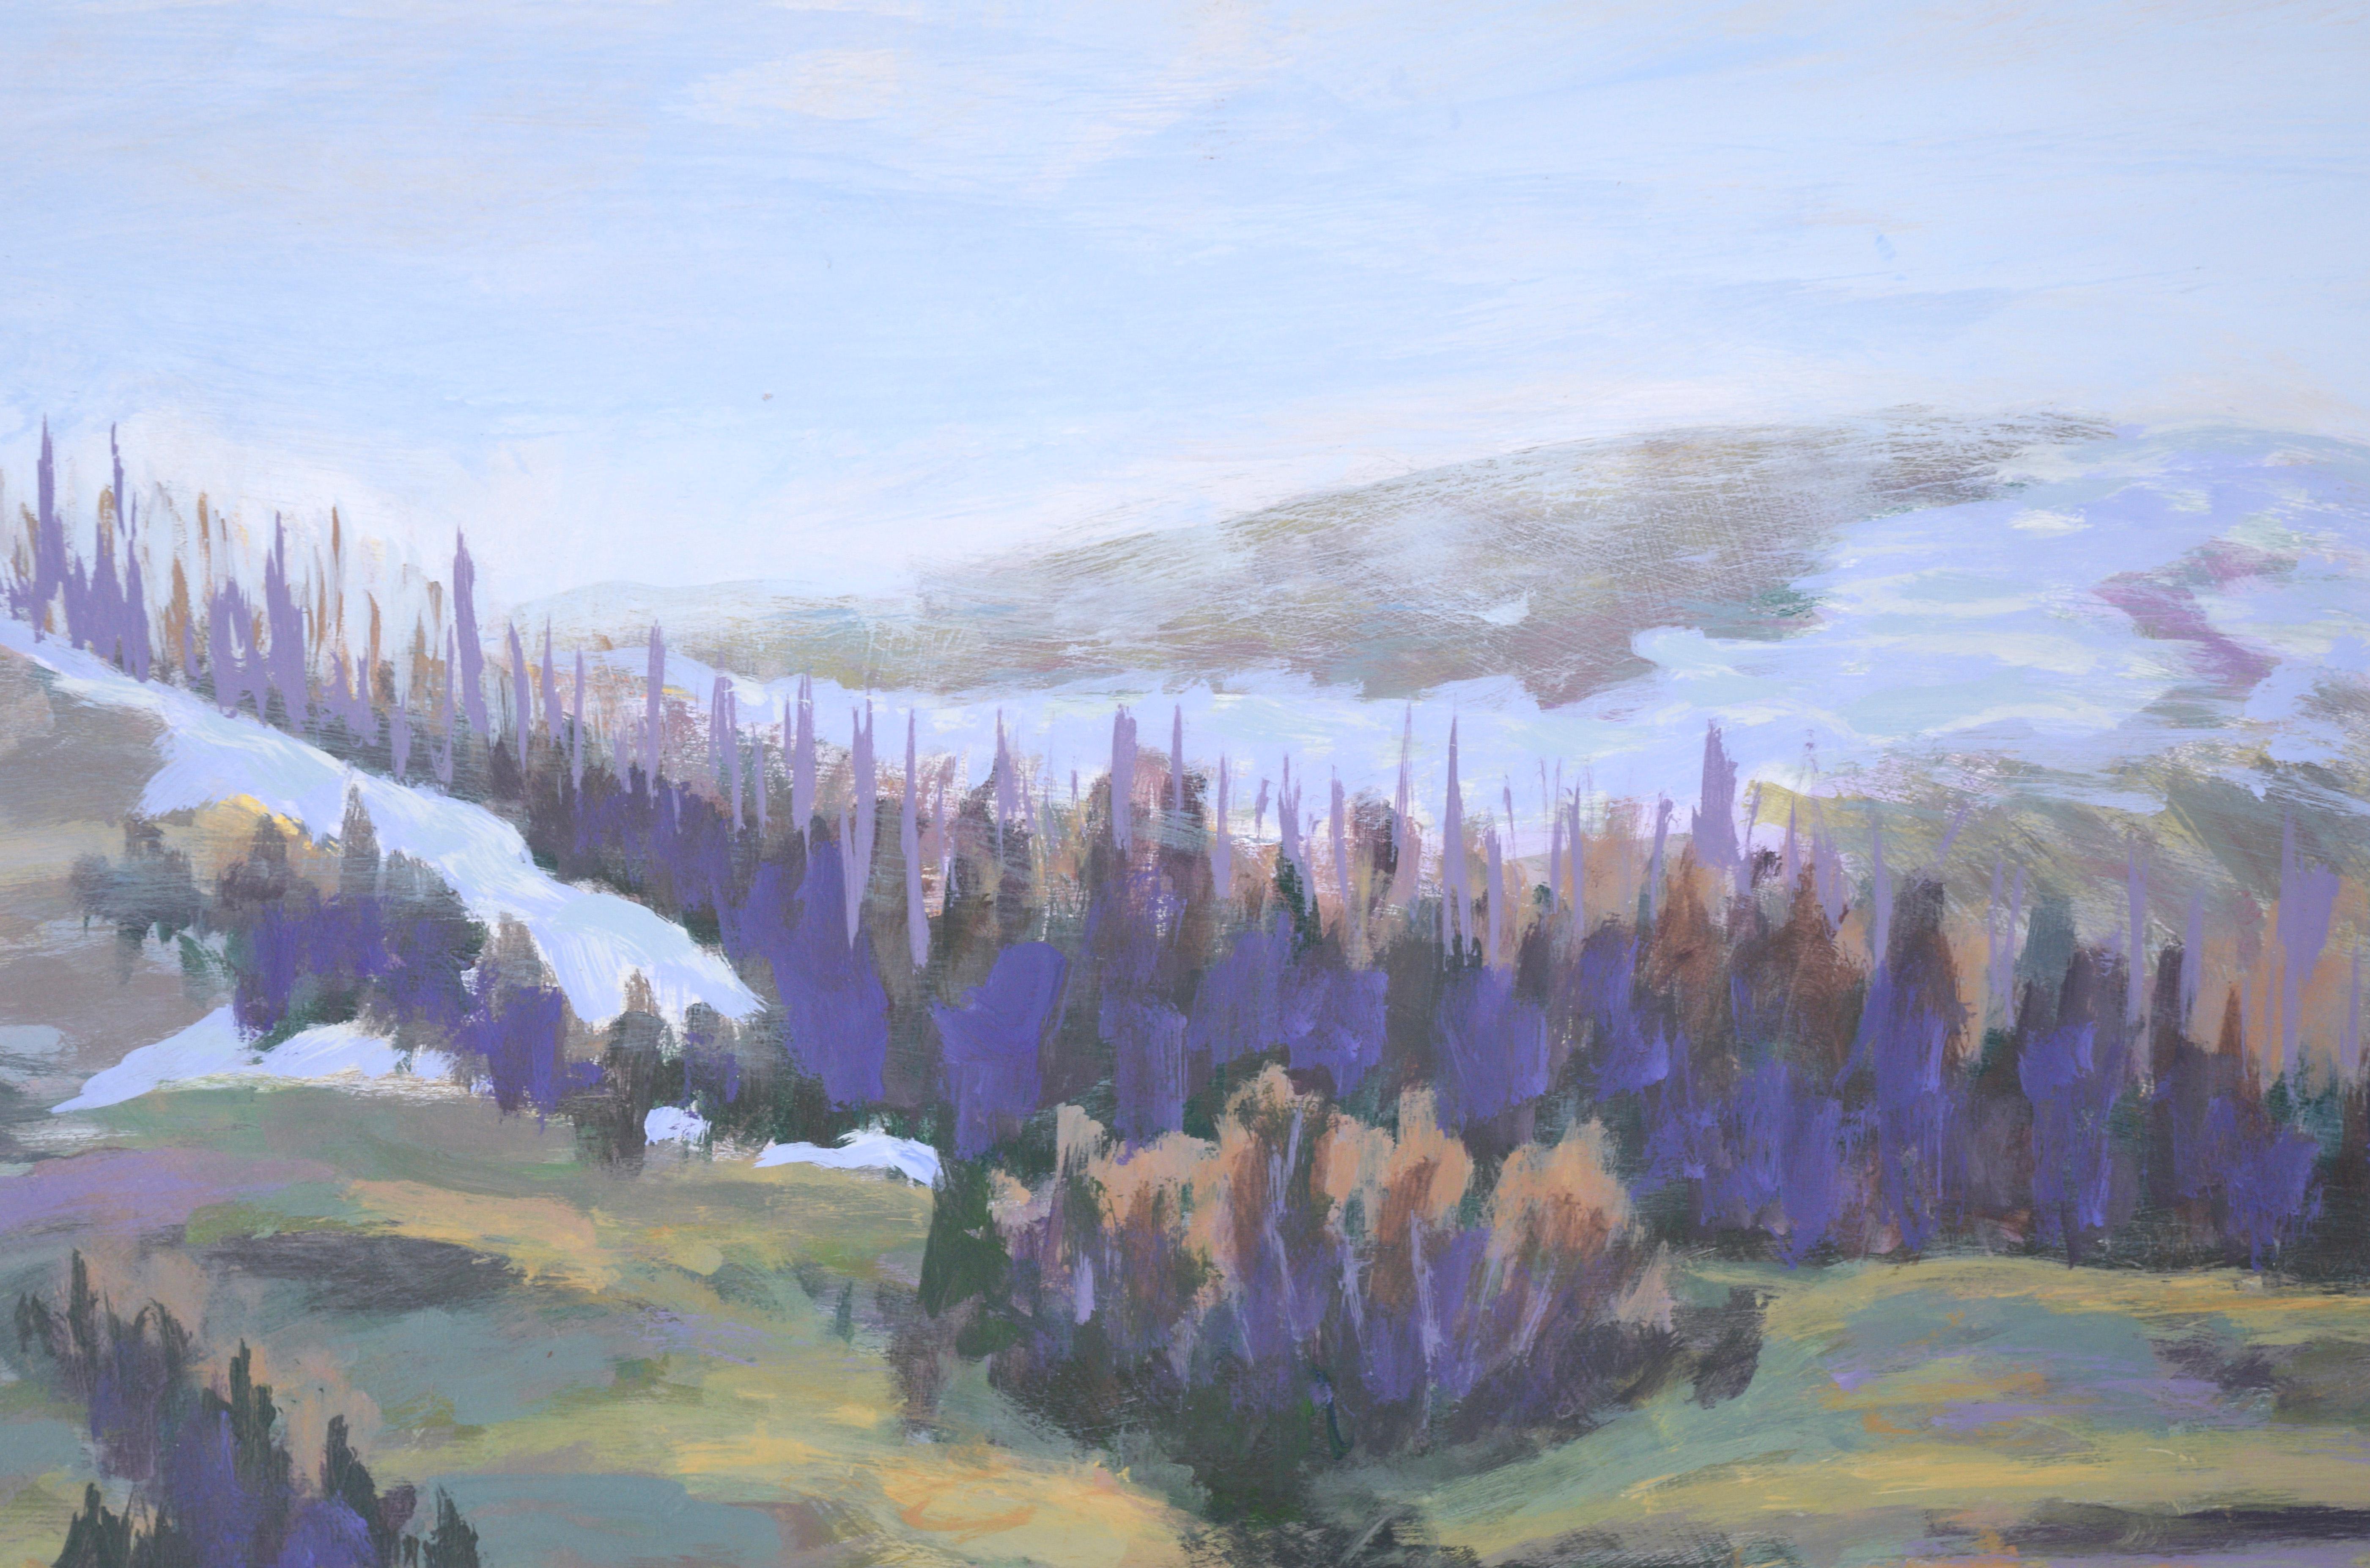 Bison in the Spring Thaw - Western Plein Aire Landscape in Acrylic on Board - Painting by Nick White